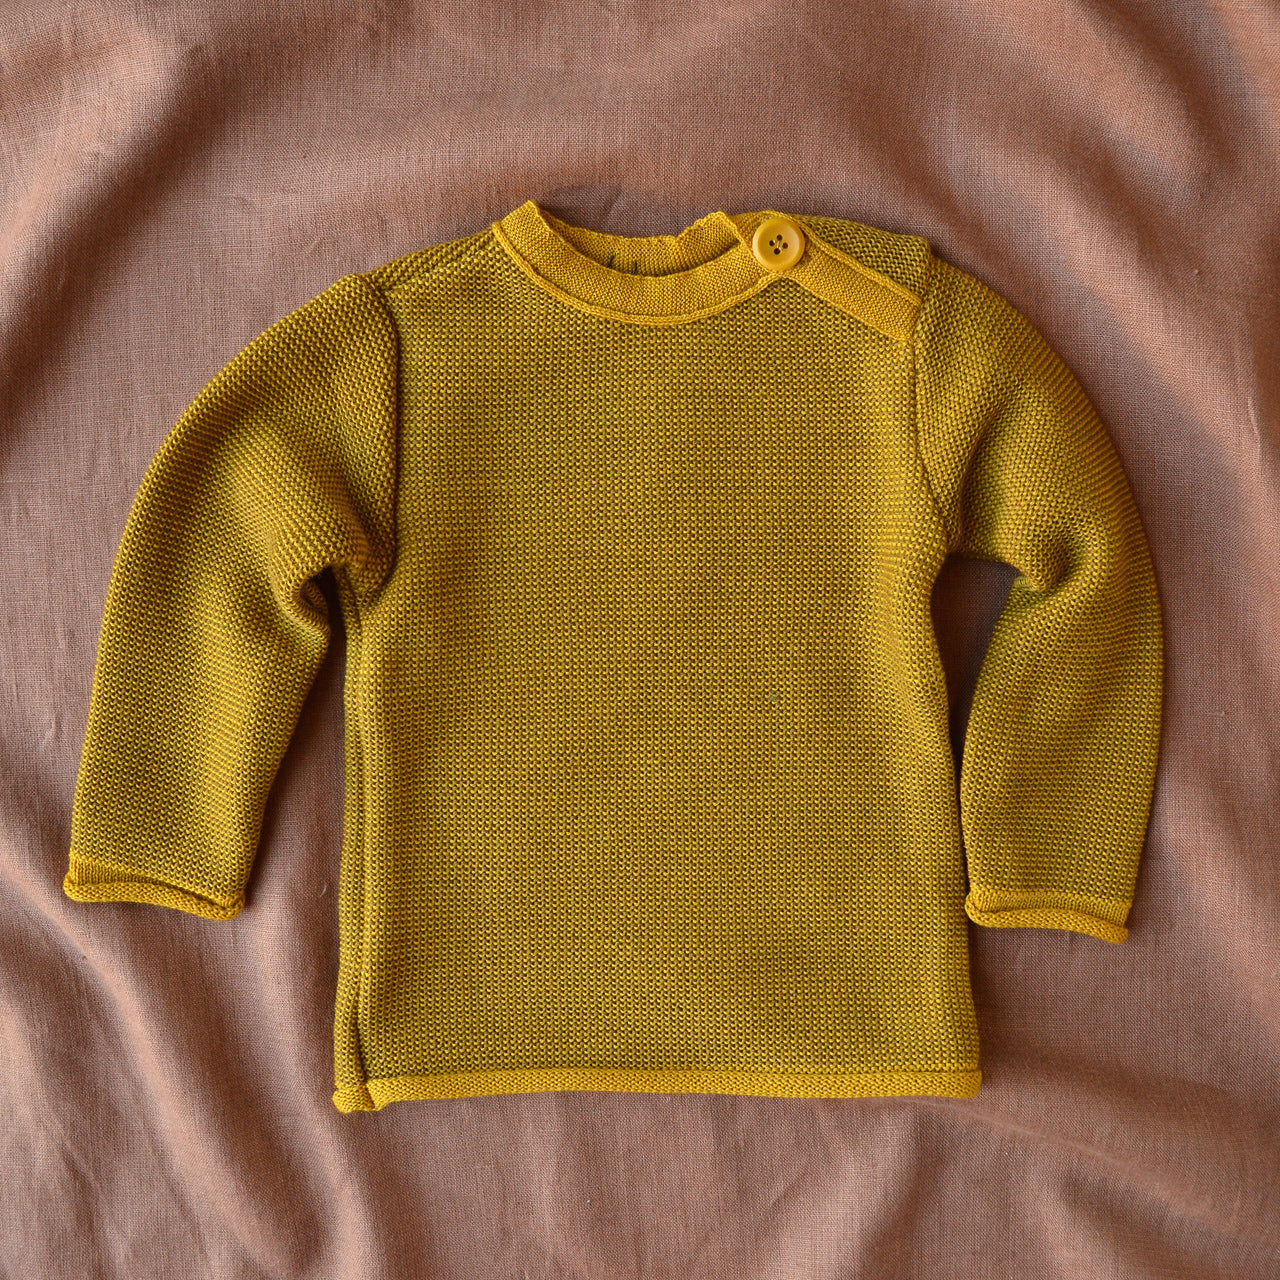 Merino Baby Jumper - Curry/Gold (0-3m) *Retired Colour*